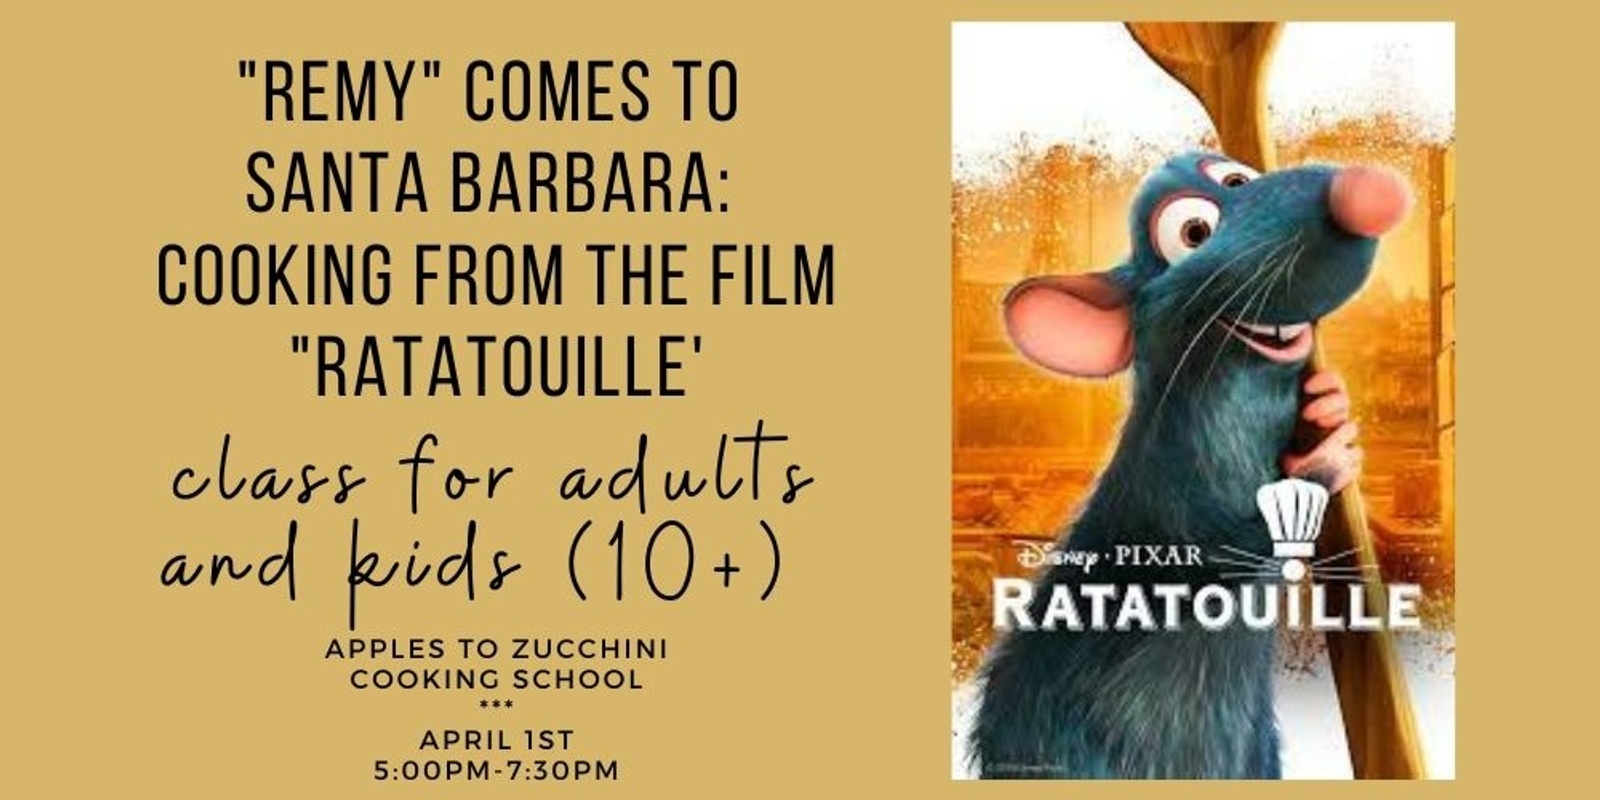 "Remy" Comes to Santa Barbara: Cooking From the Film "Ratatouille"